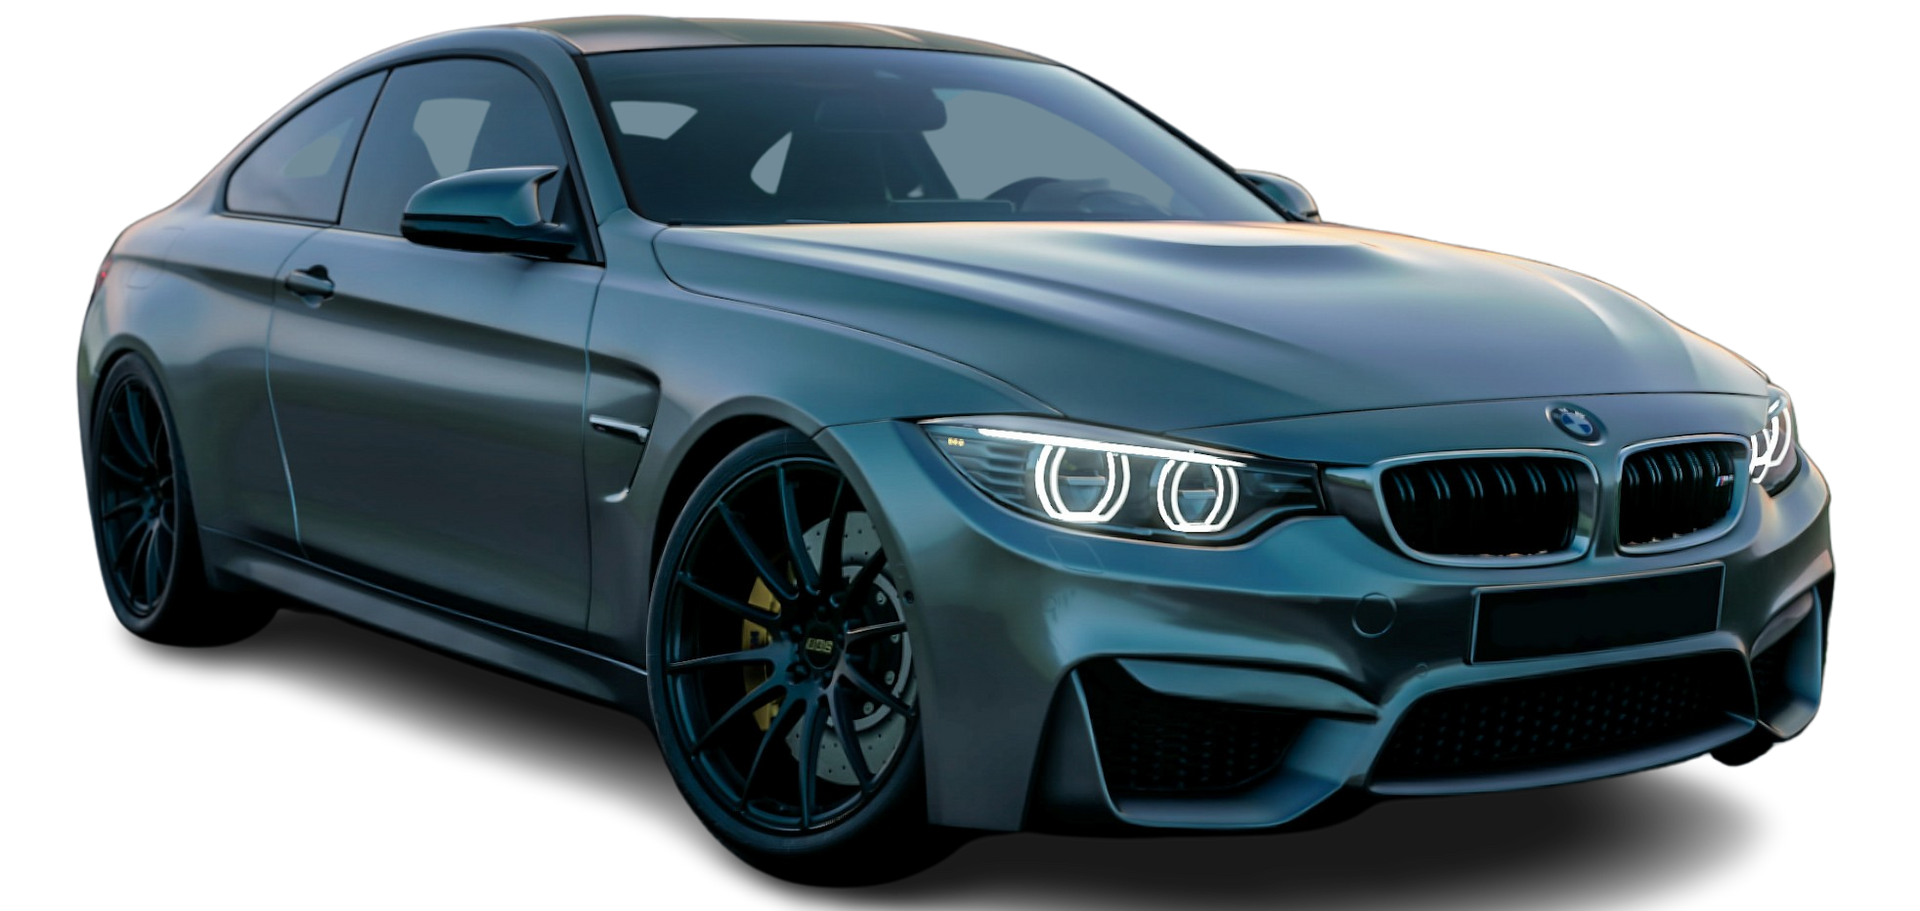 A bmw m4 coupe is shown on a white background.